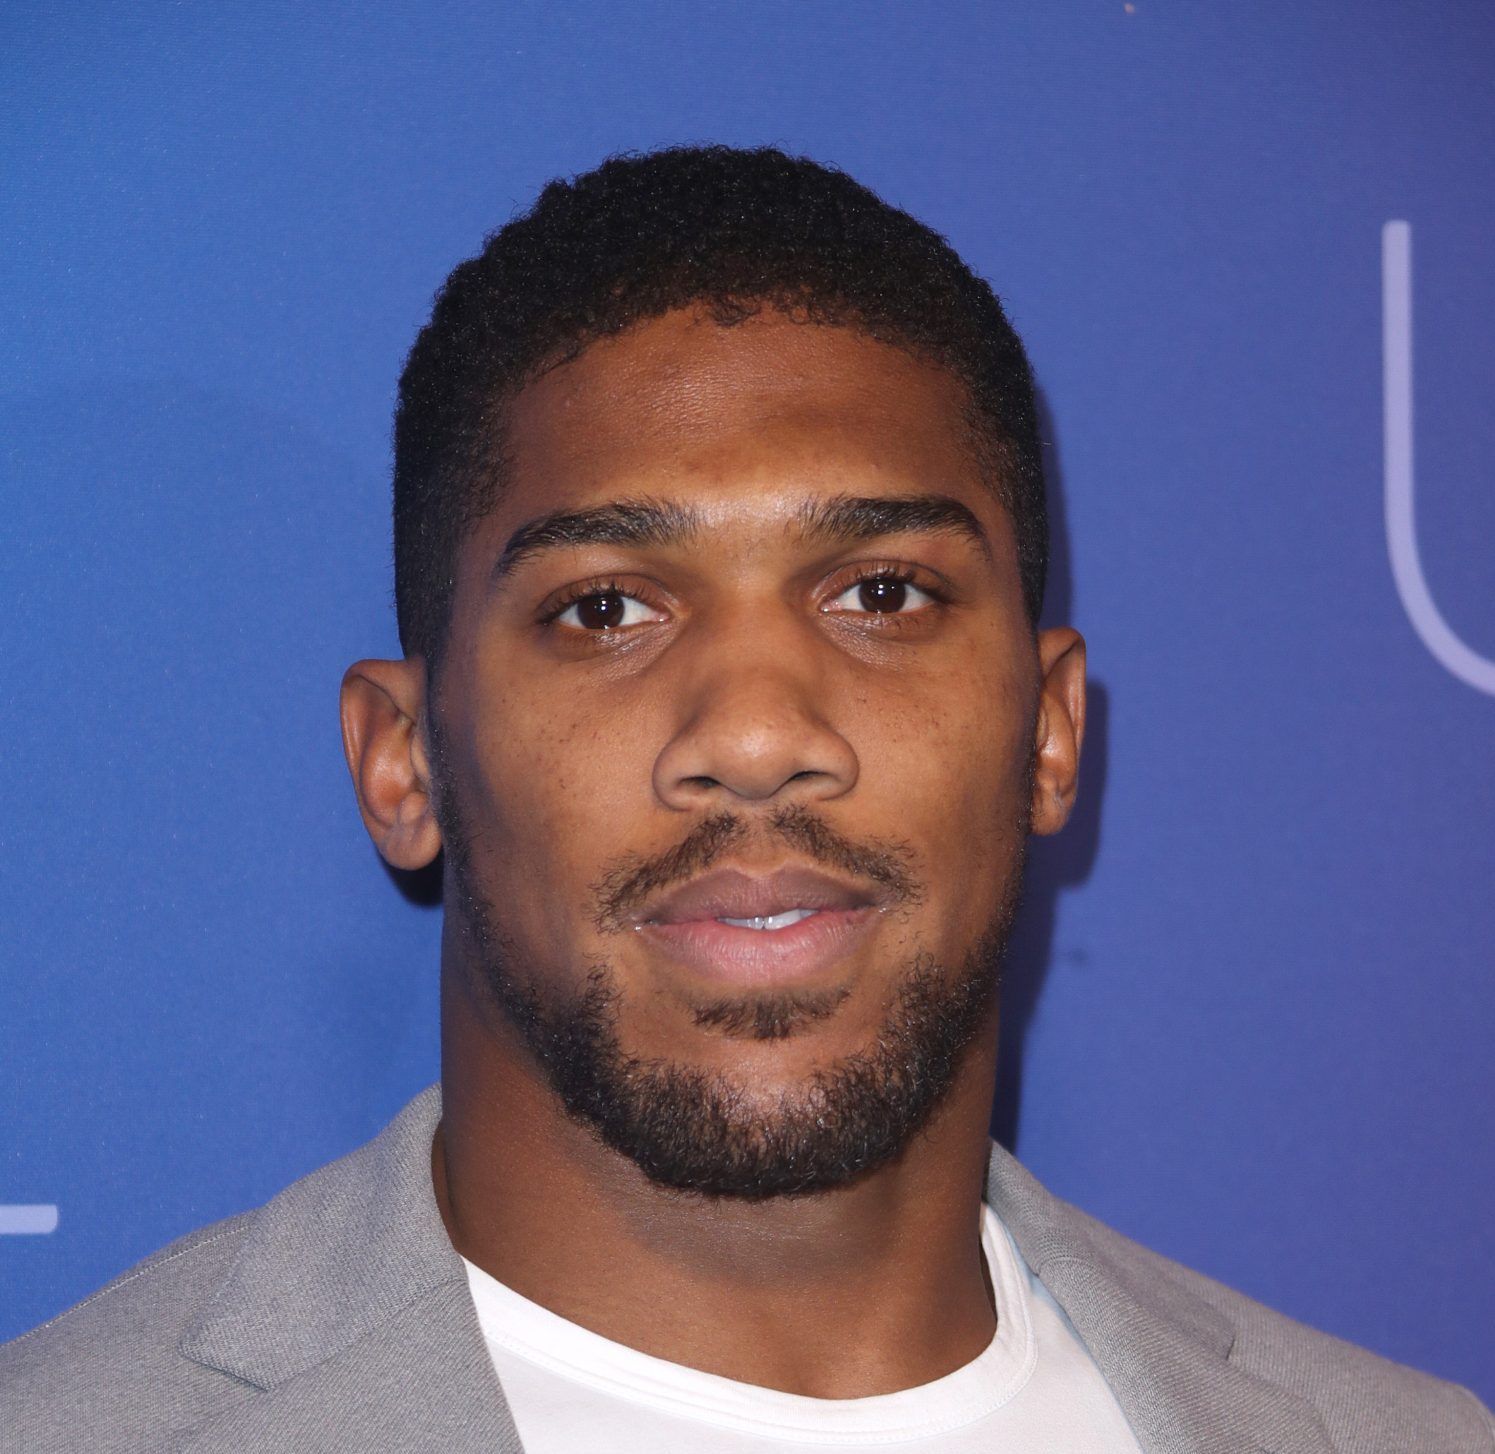 LONDON, ENGLAND - FEBRUARY 12: Anthony Joshua attends the Sky Up Next 2020 at Tate Modern on February 12, 2020 in London, England. (Photo by Mike Marsland/WireImage)